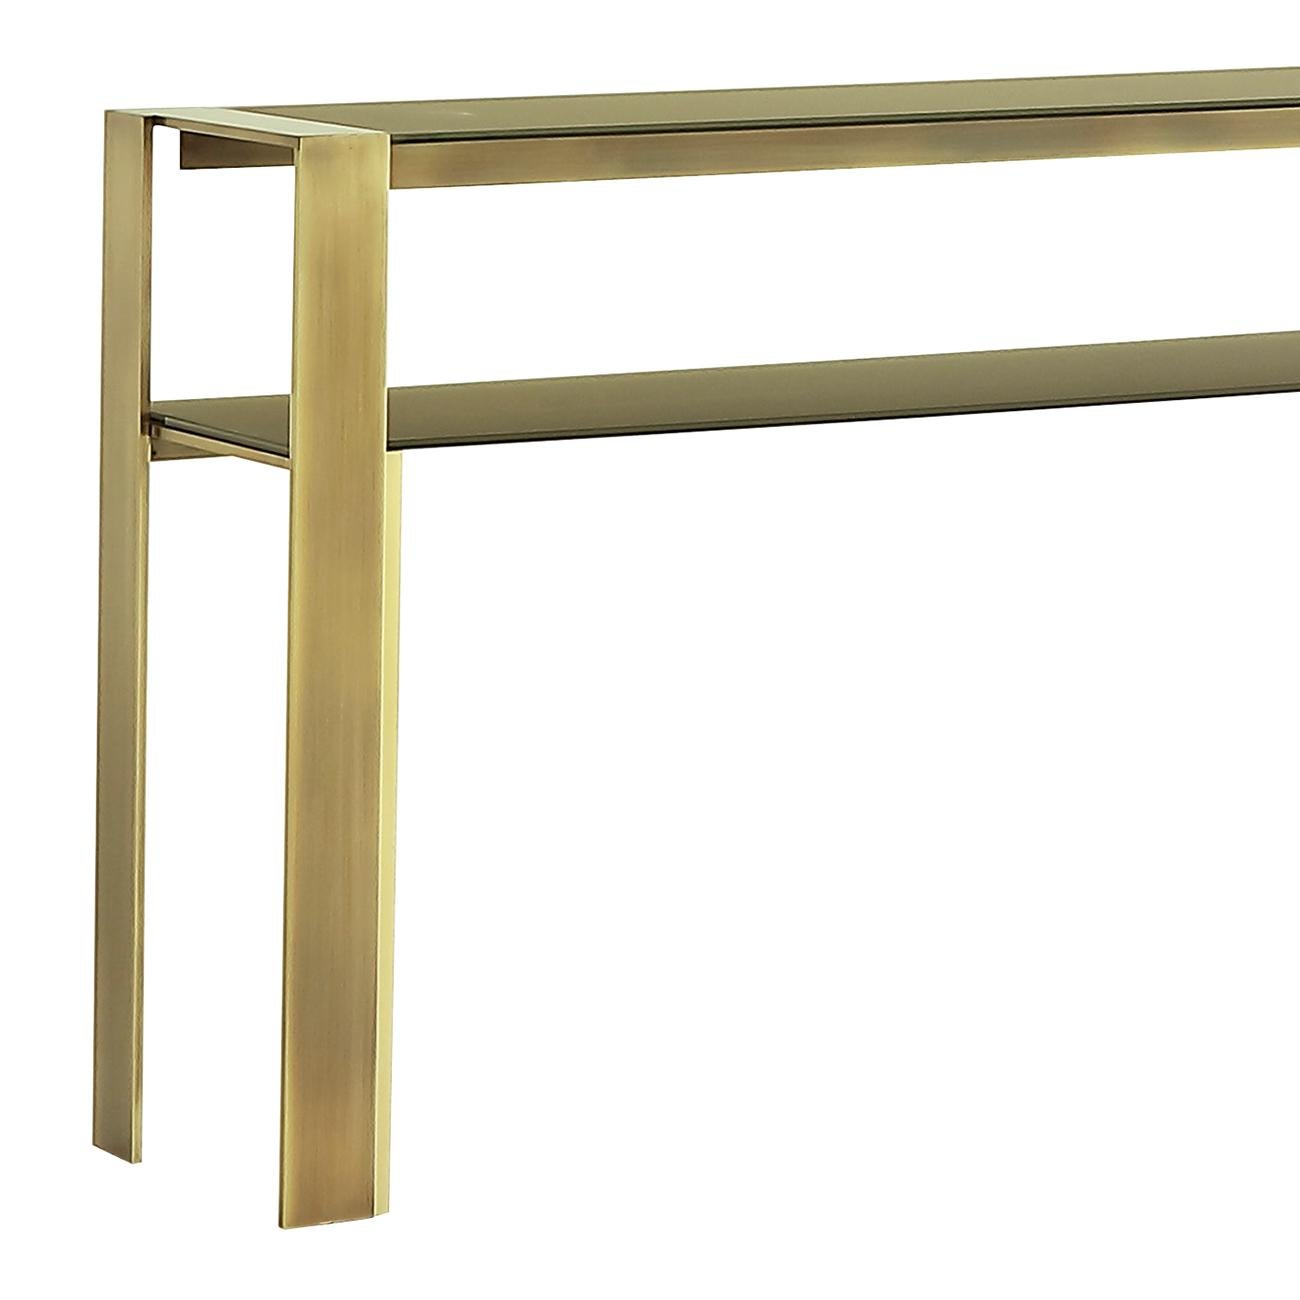 Console table refined bronze with bronze frame
structure in glossy brass patinated finish and with
up and down tops in tempered glass in bronze finish.